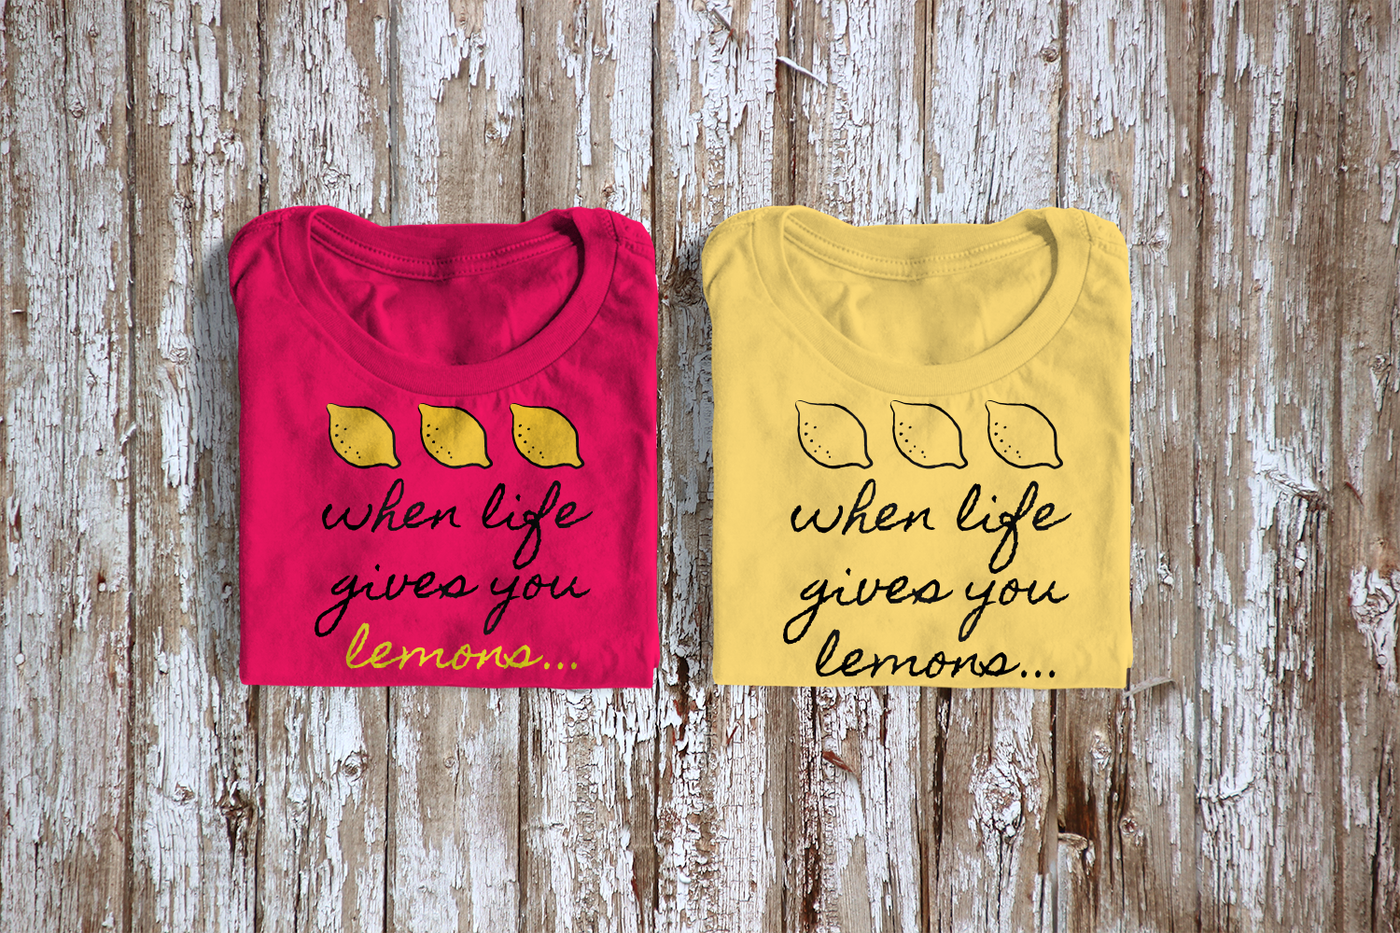 Three lemon design with "when life gives you lemons..." below